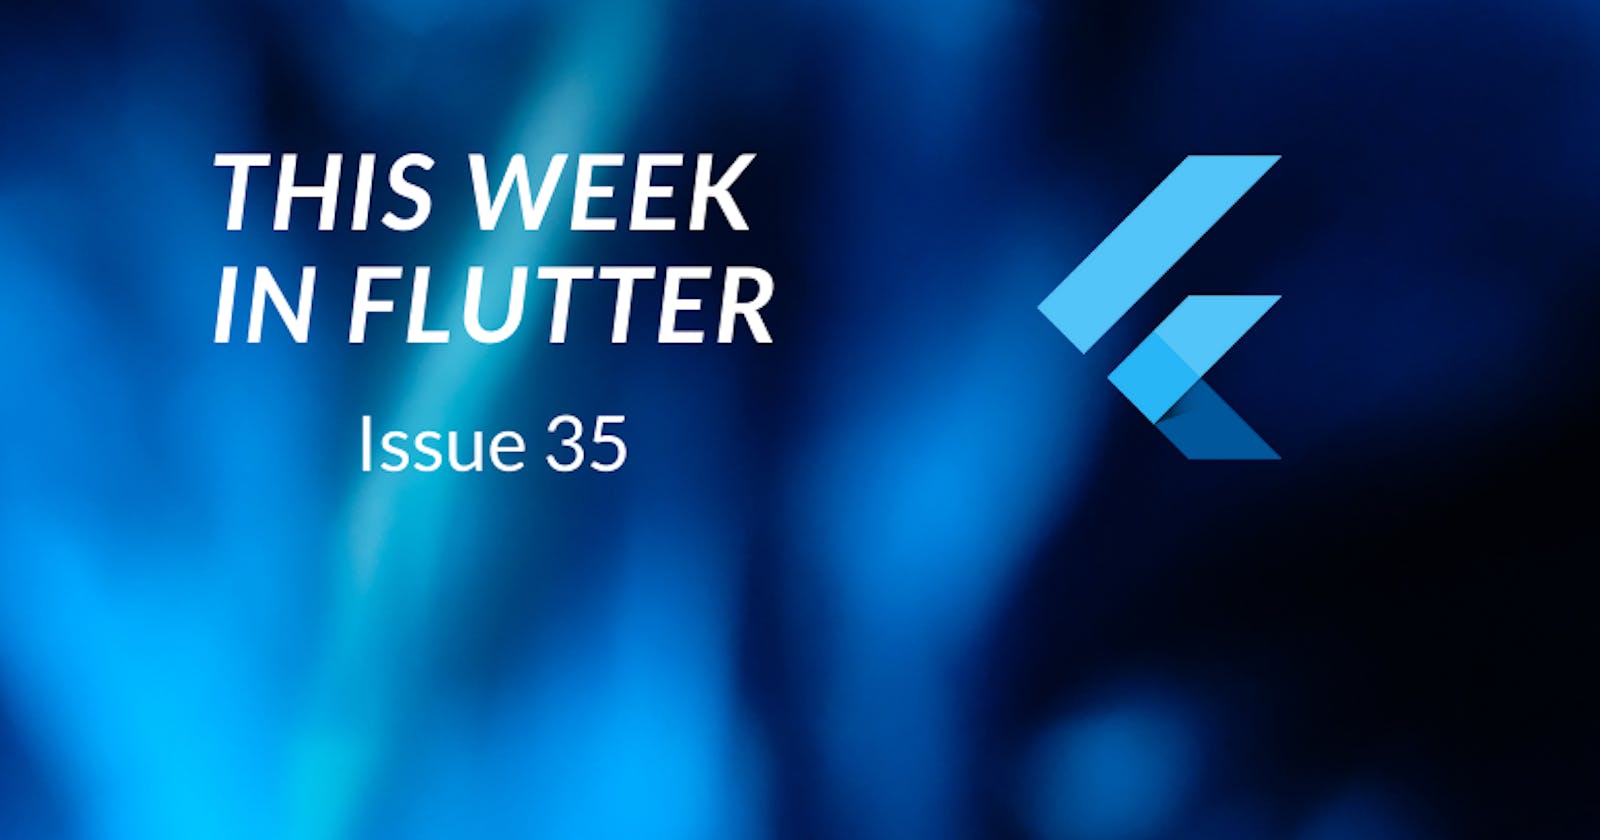 This week in Flutter #35